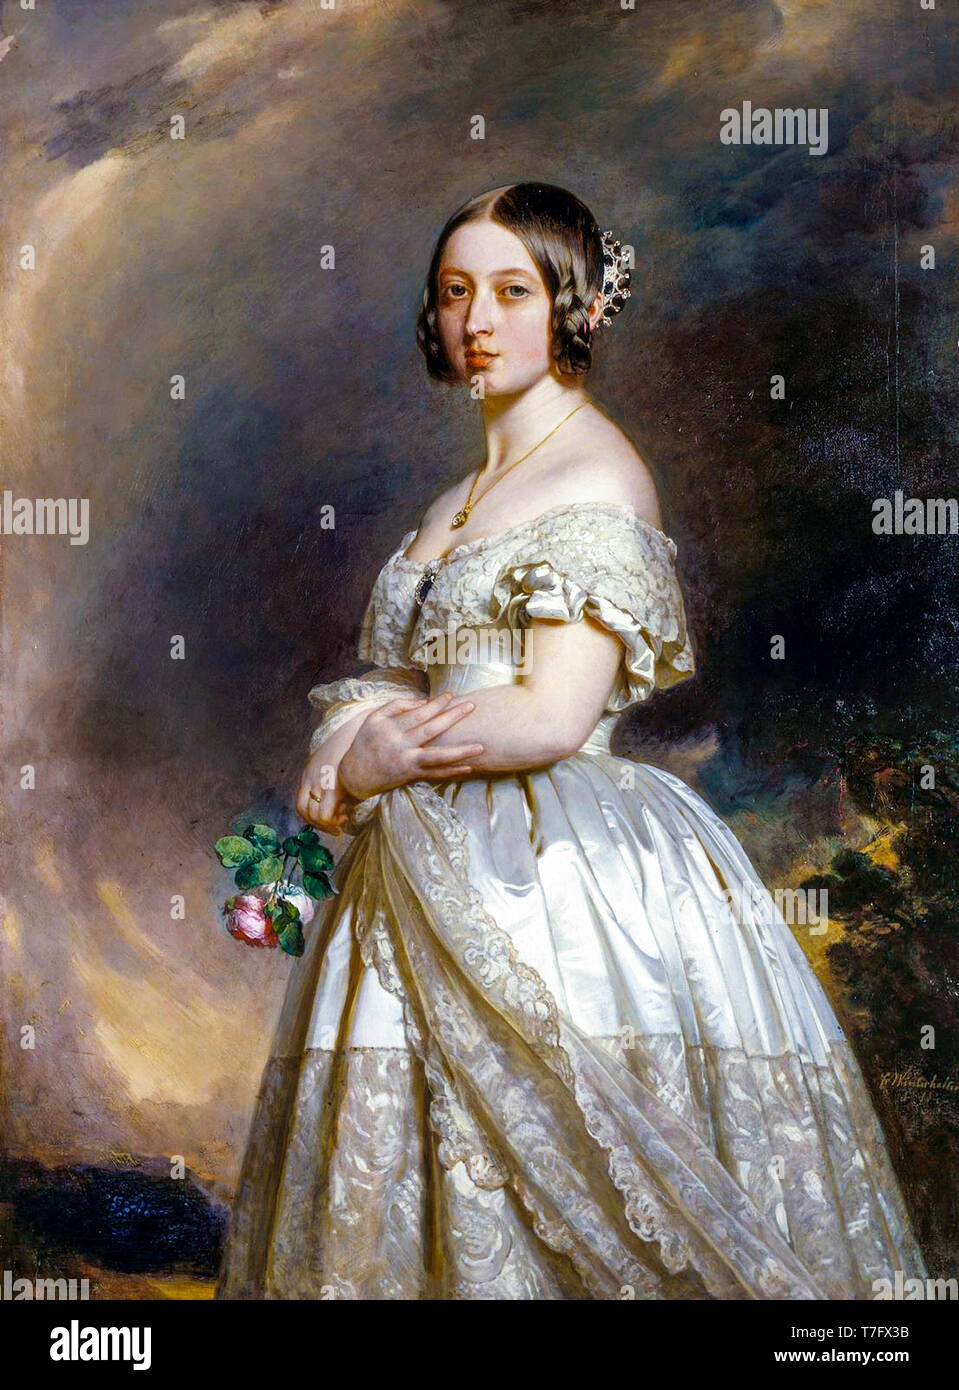 Queen Victoria as a young woman, portrait painting by Franz Xaver Winterhalter, 1842 Stock Photo